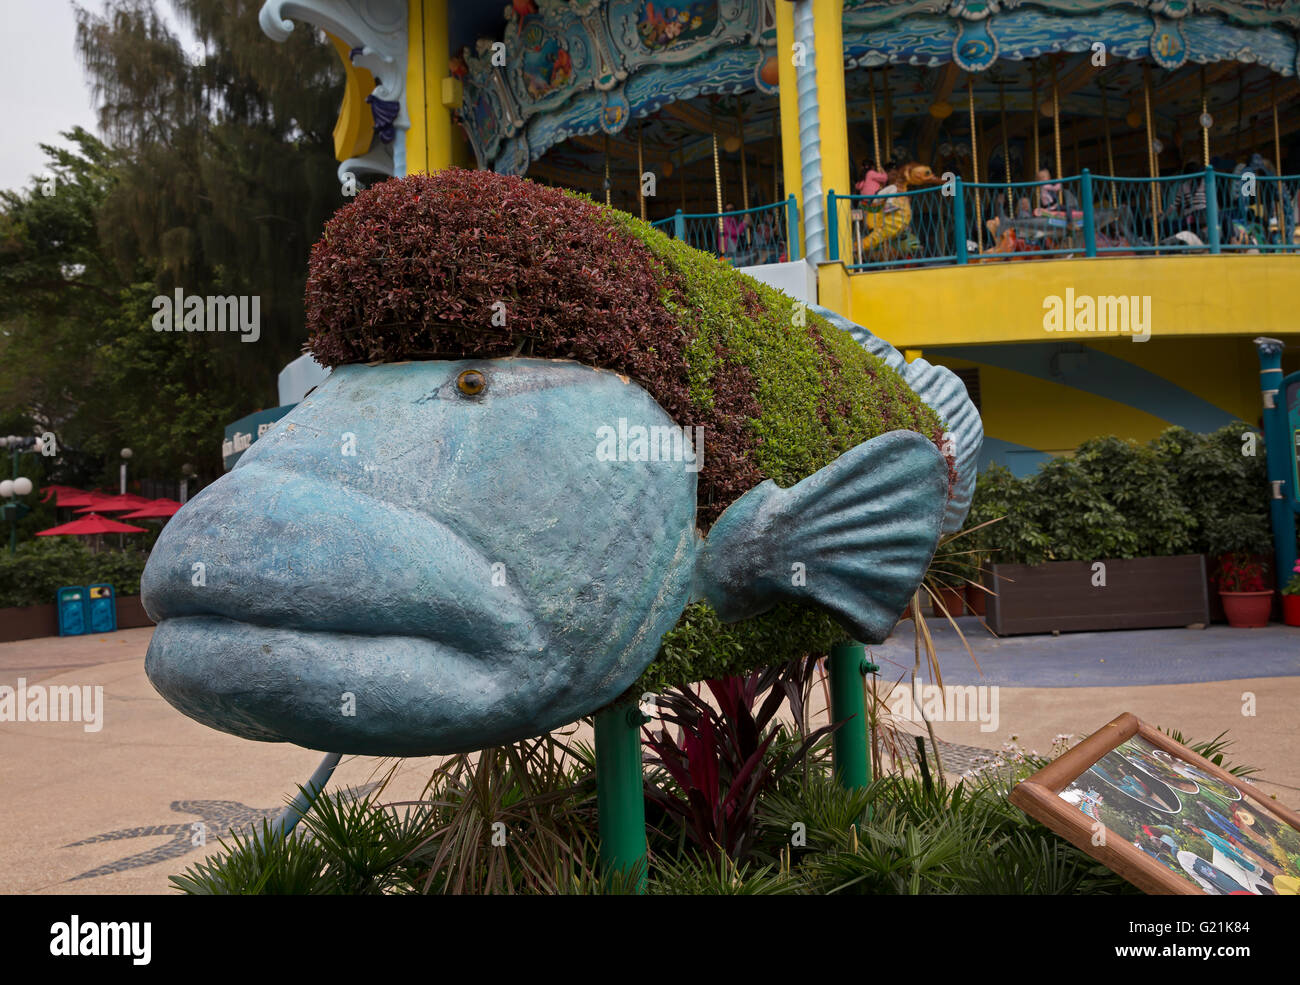 Giant size fishmade of Topiary in Ocean Park Hong Kong Stock Photo